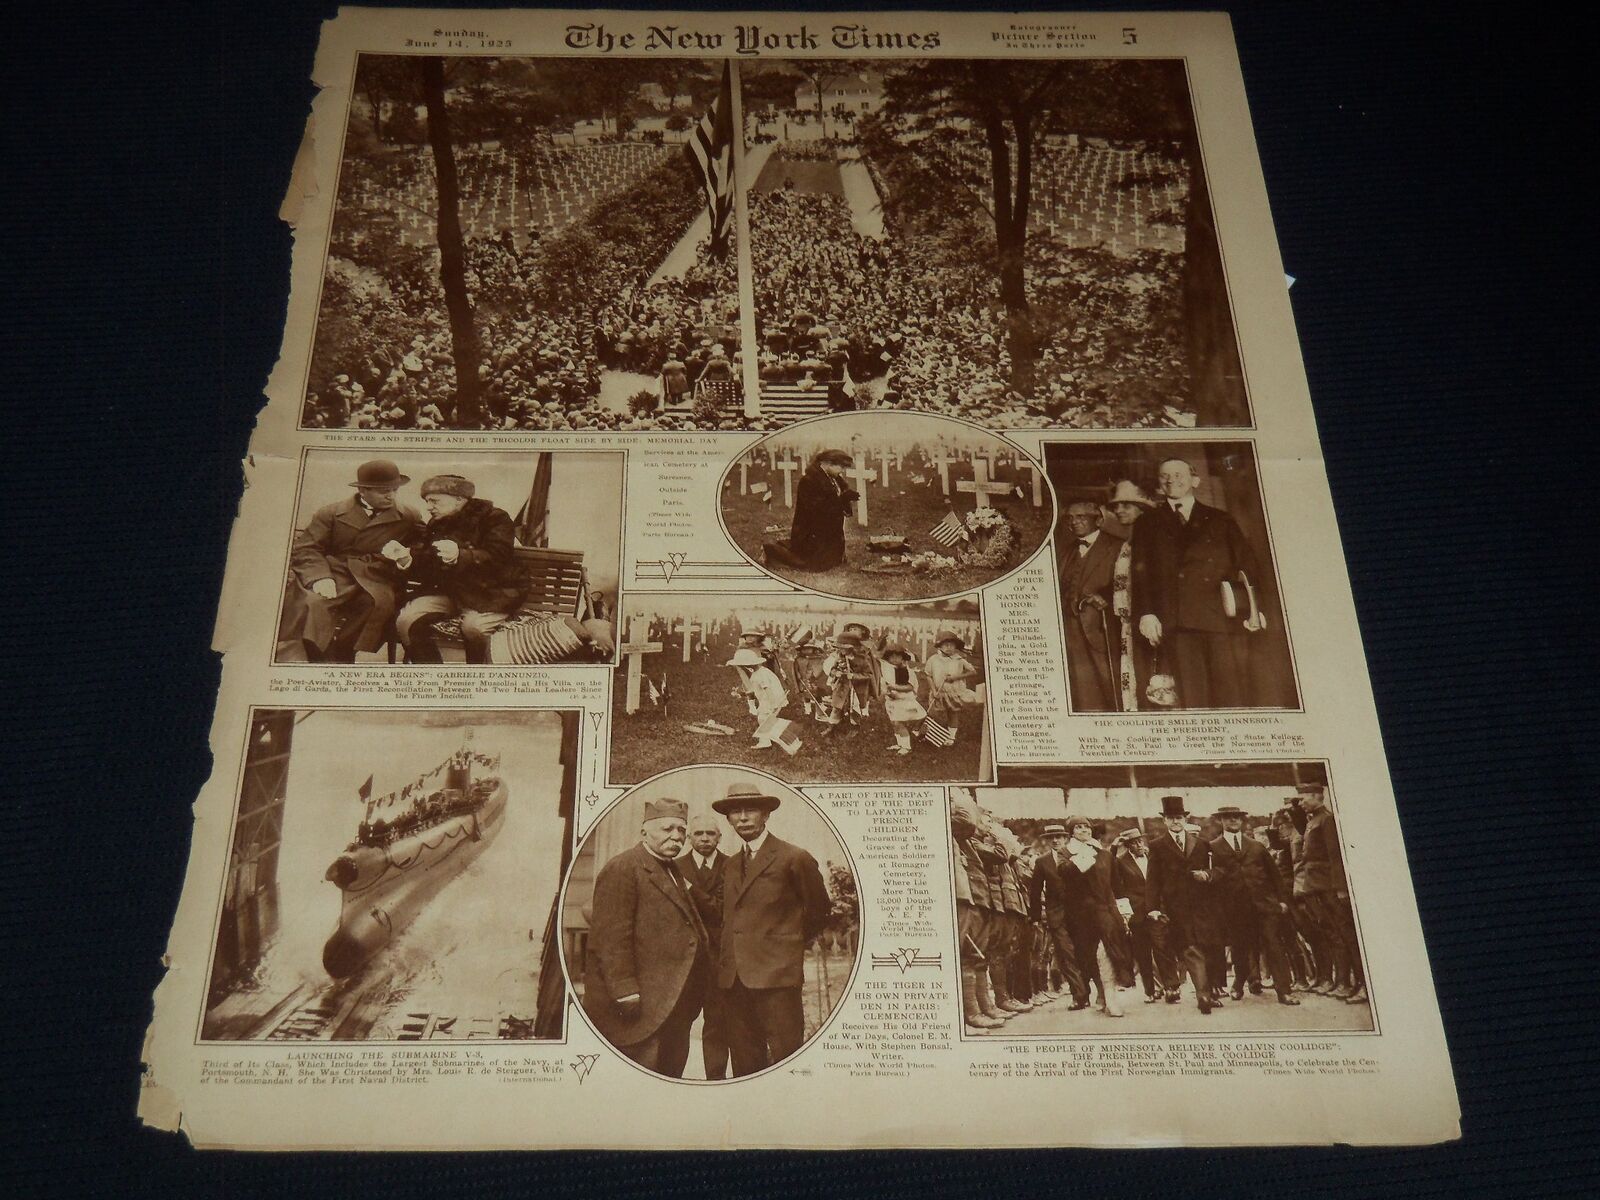 1925 JUNE 14 NEW YORK TIMES PICTURE SECTION - MEMORIAL DAY - PHOTOS - NT 9492